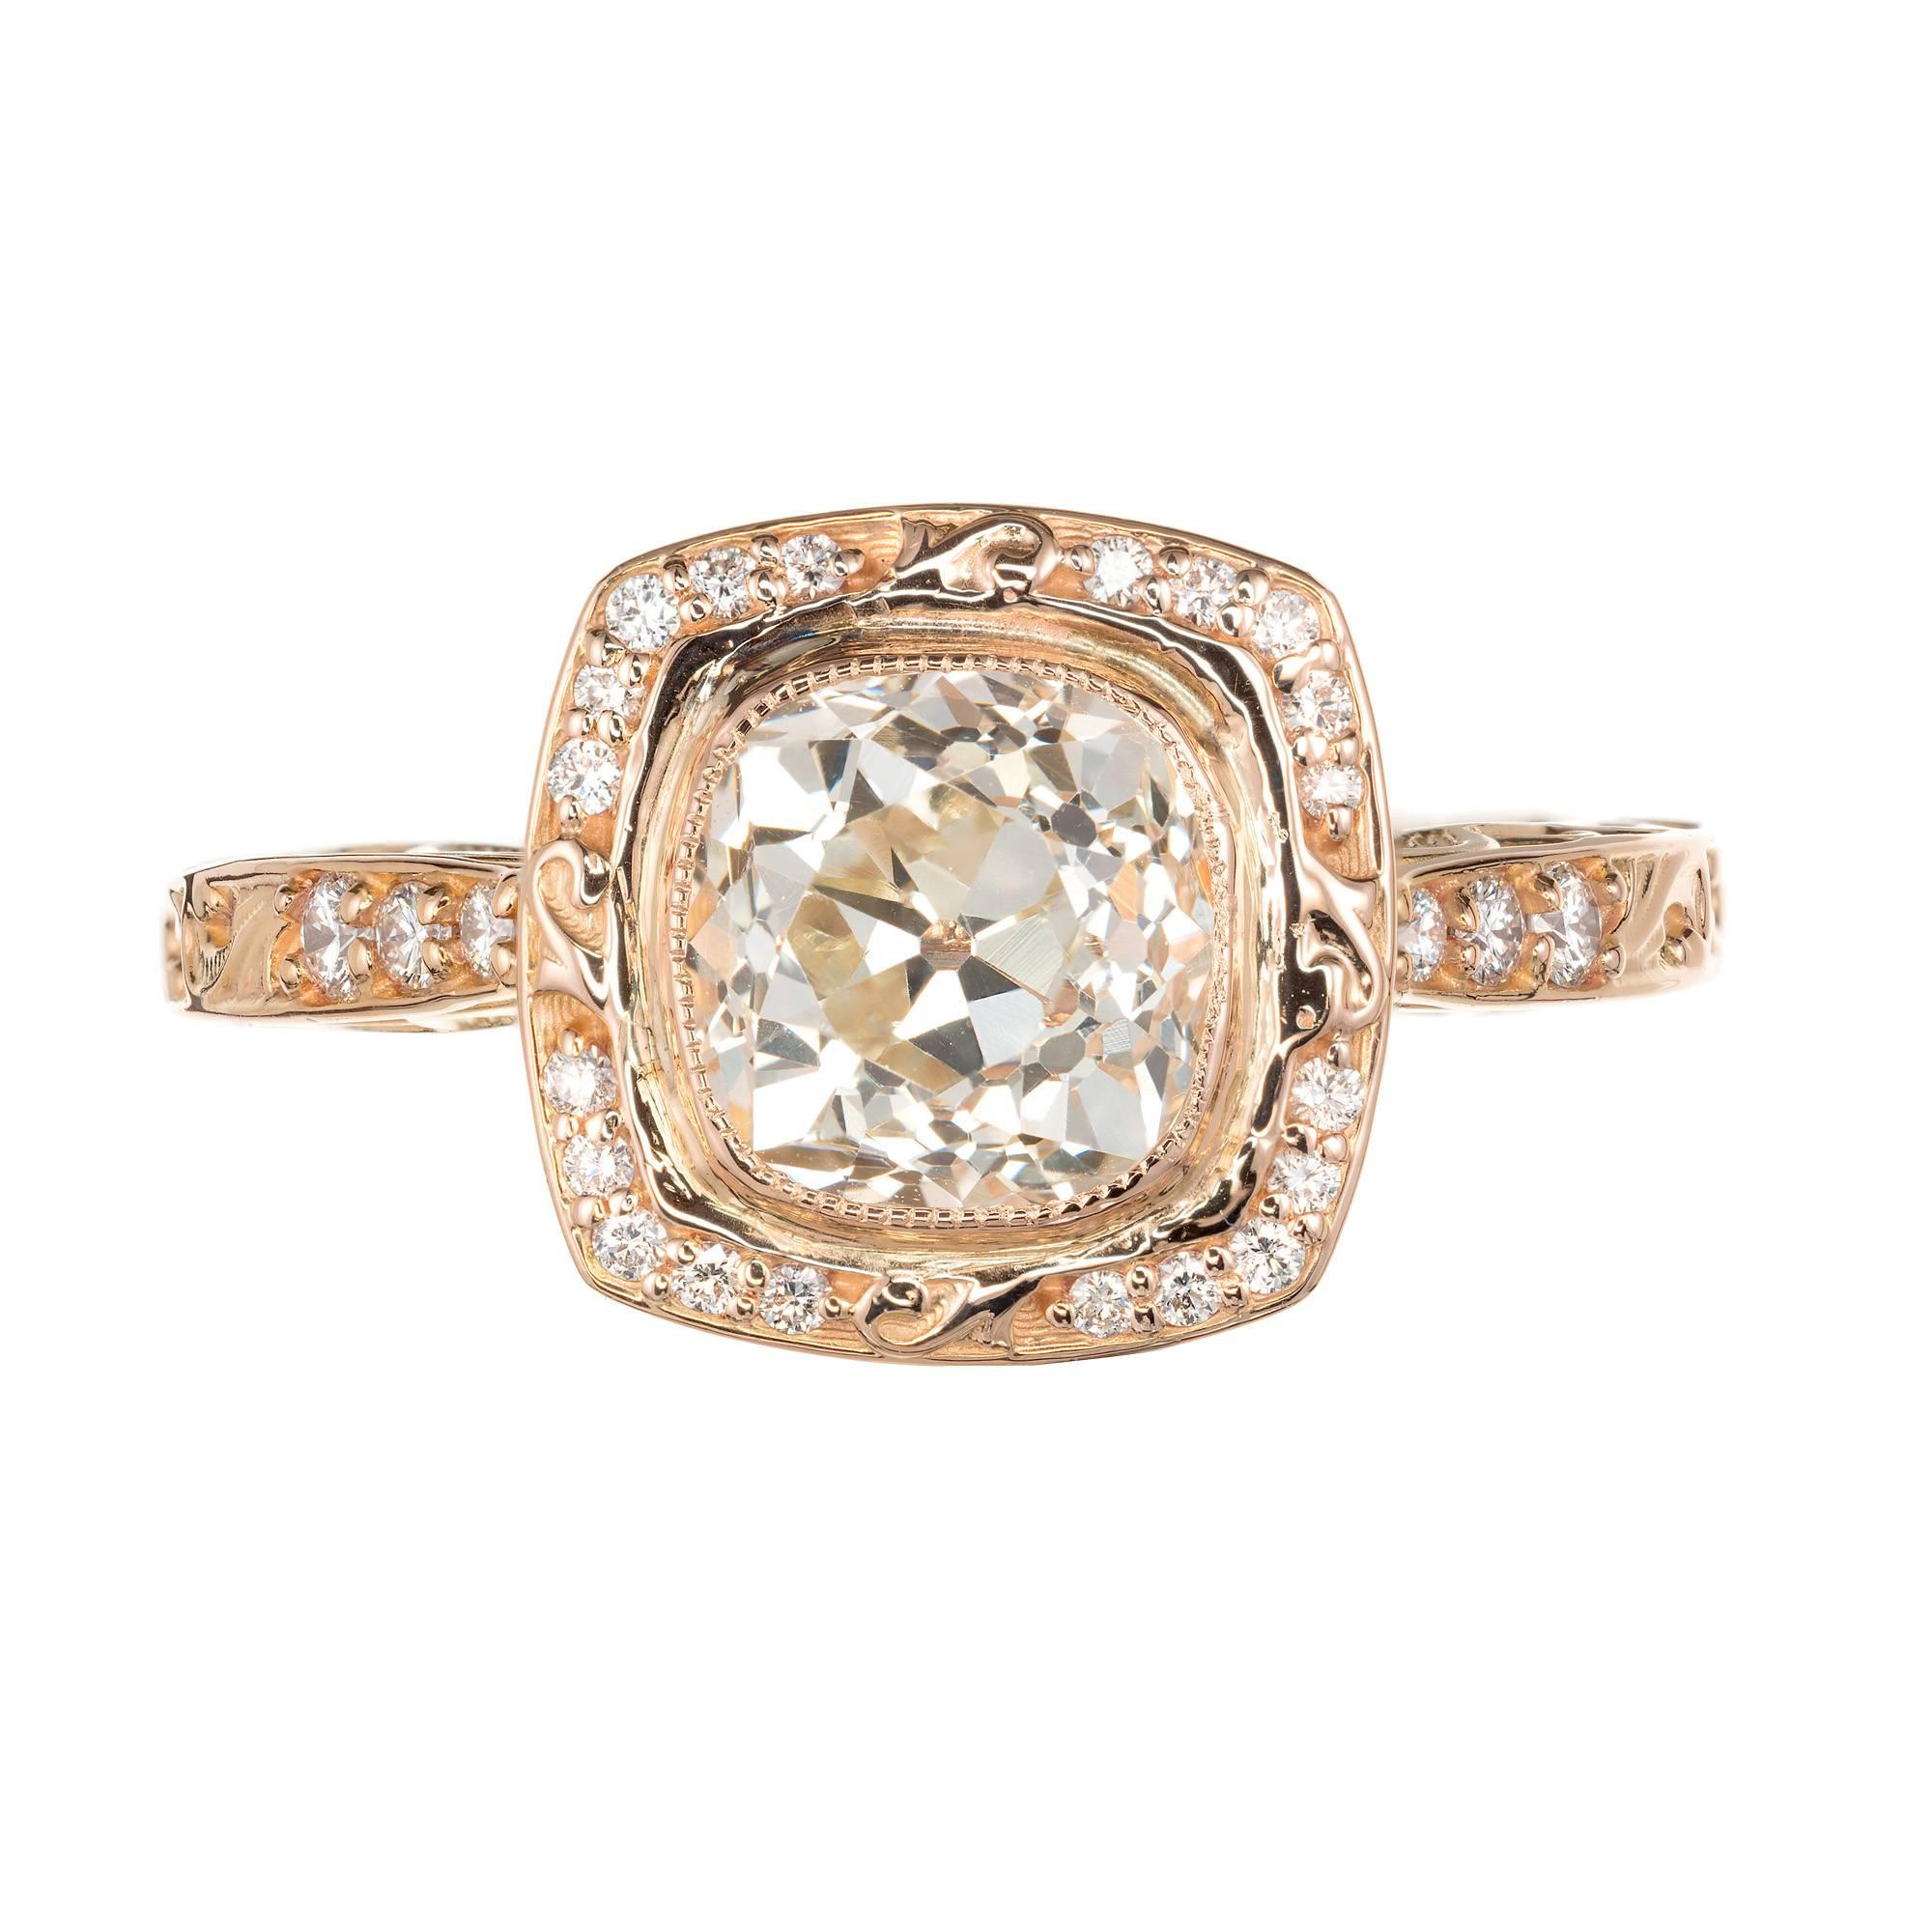 Peter Suchy  square scroll cushion bezel set, simple halo design engagement ring with scroll shoulders and sides. 18k rose gold setting with diamond accents. A wedding band can fit flush to the ring. Old mine brilliant cut squarish cushion cut